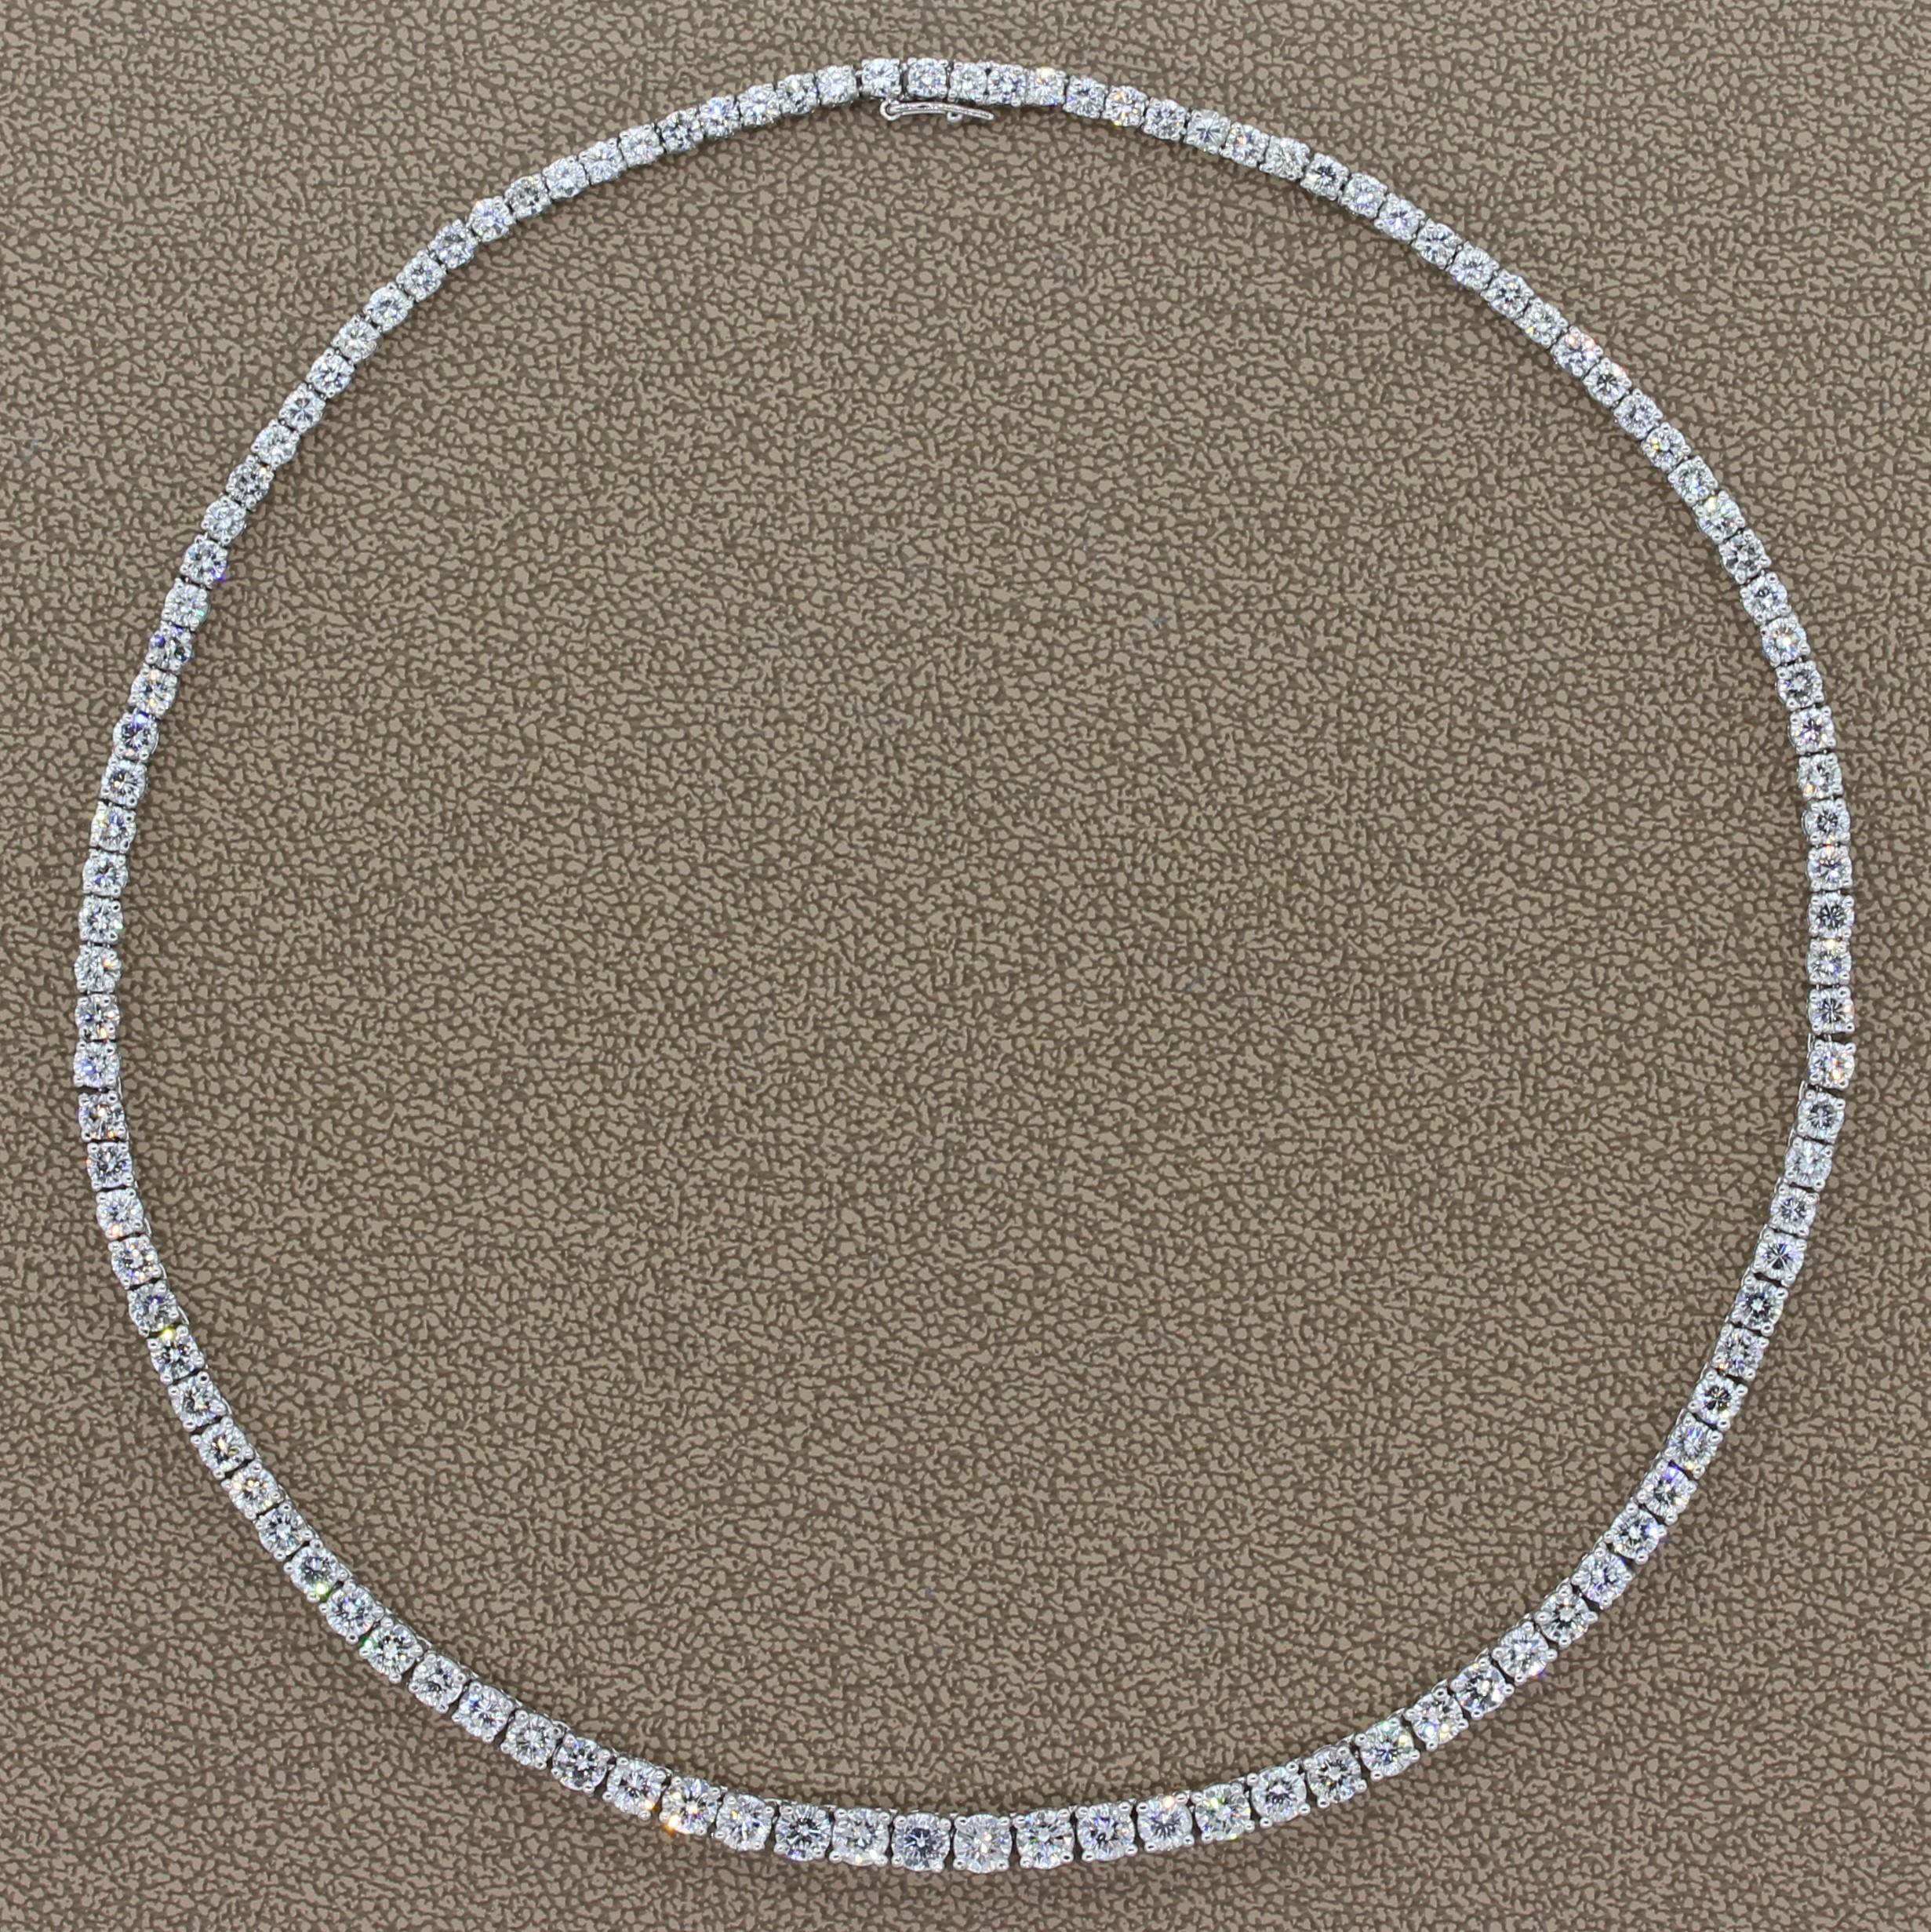 A traditional sleek tennis necklace featuring 10.00 carats of round cut diamonds. The colorless graduating diamonds are prong set in 18K white gold. This necklace is secured with a box clasp closure and a safety latch for added security.

Necklace